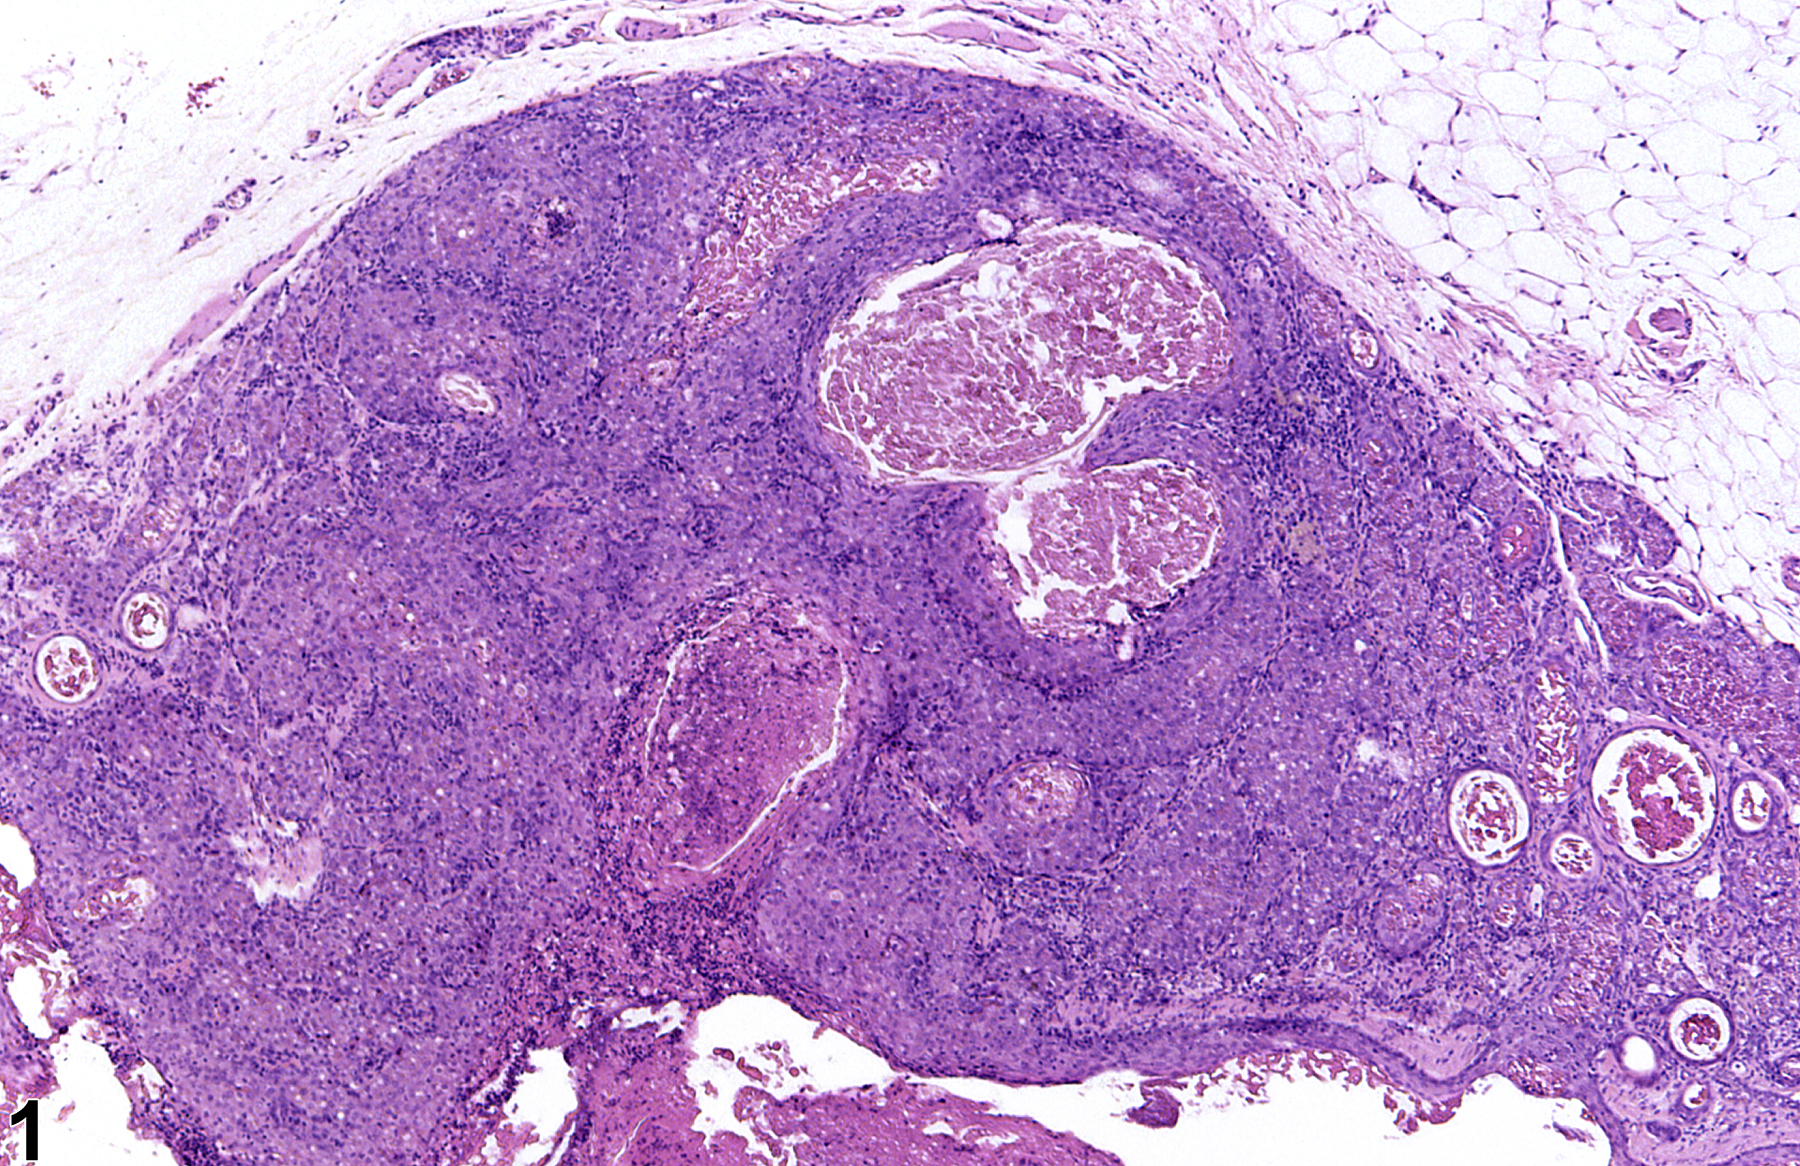 Image of hyperplasia in the clitoral gland from a female F344/N rat in a chronic study